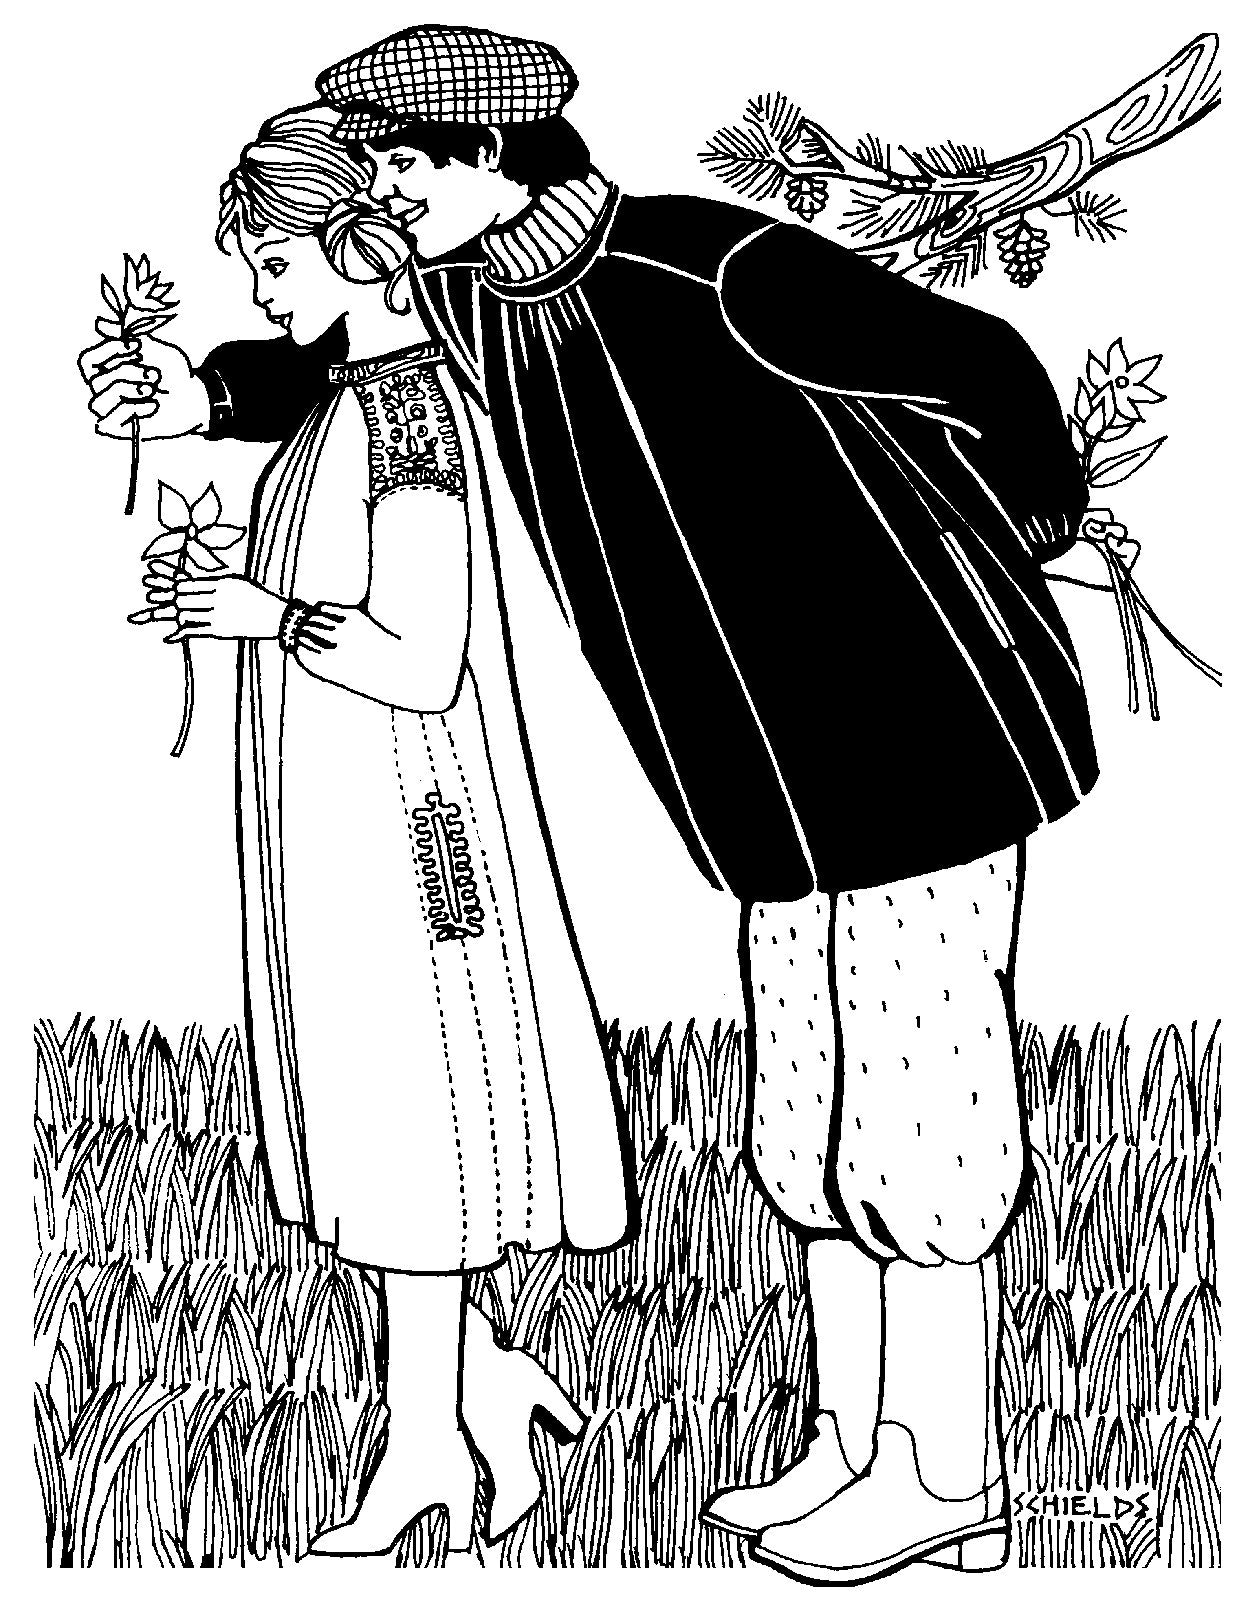 Black and white pen and ink drawing by artist Gretchen Shields. A man standing behind a women giver her flowers wearing the 148 Black Forest Smock.